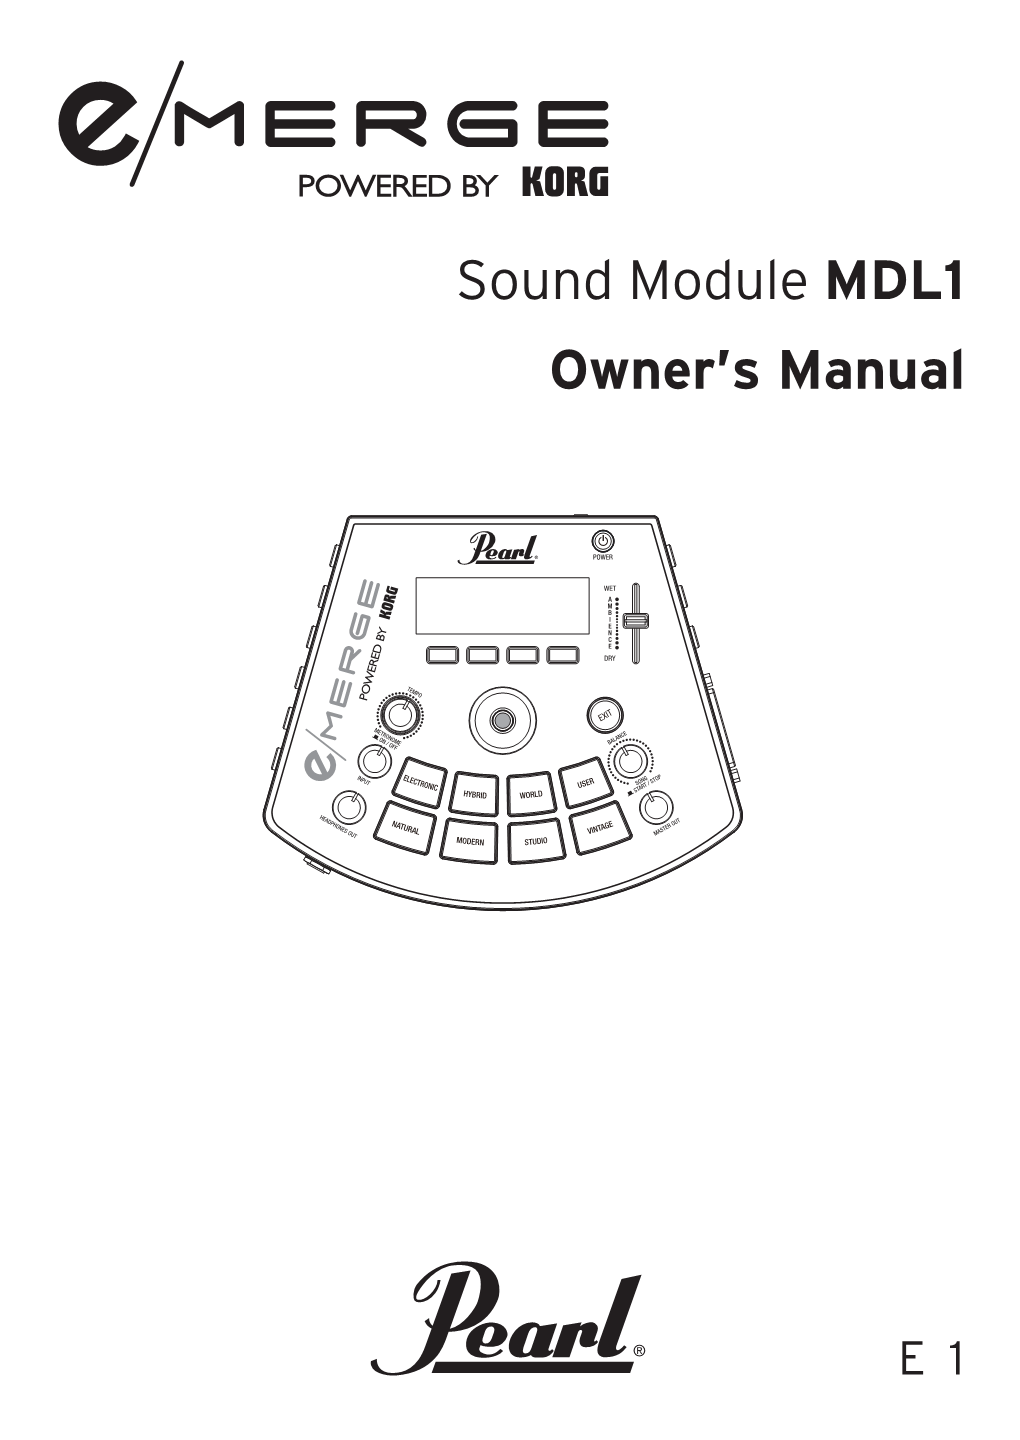 Sound Module MDL1 Owner's Manual